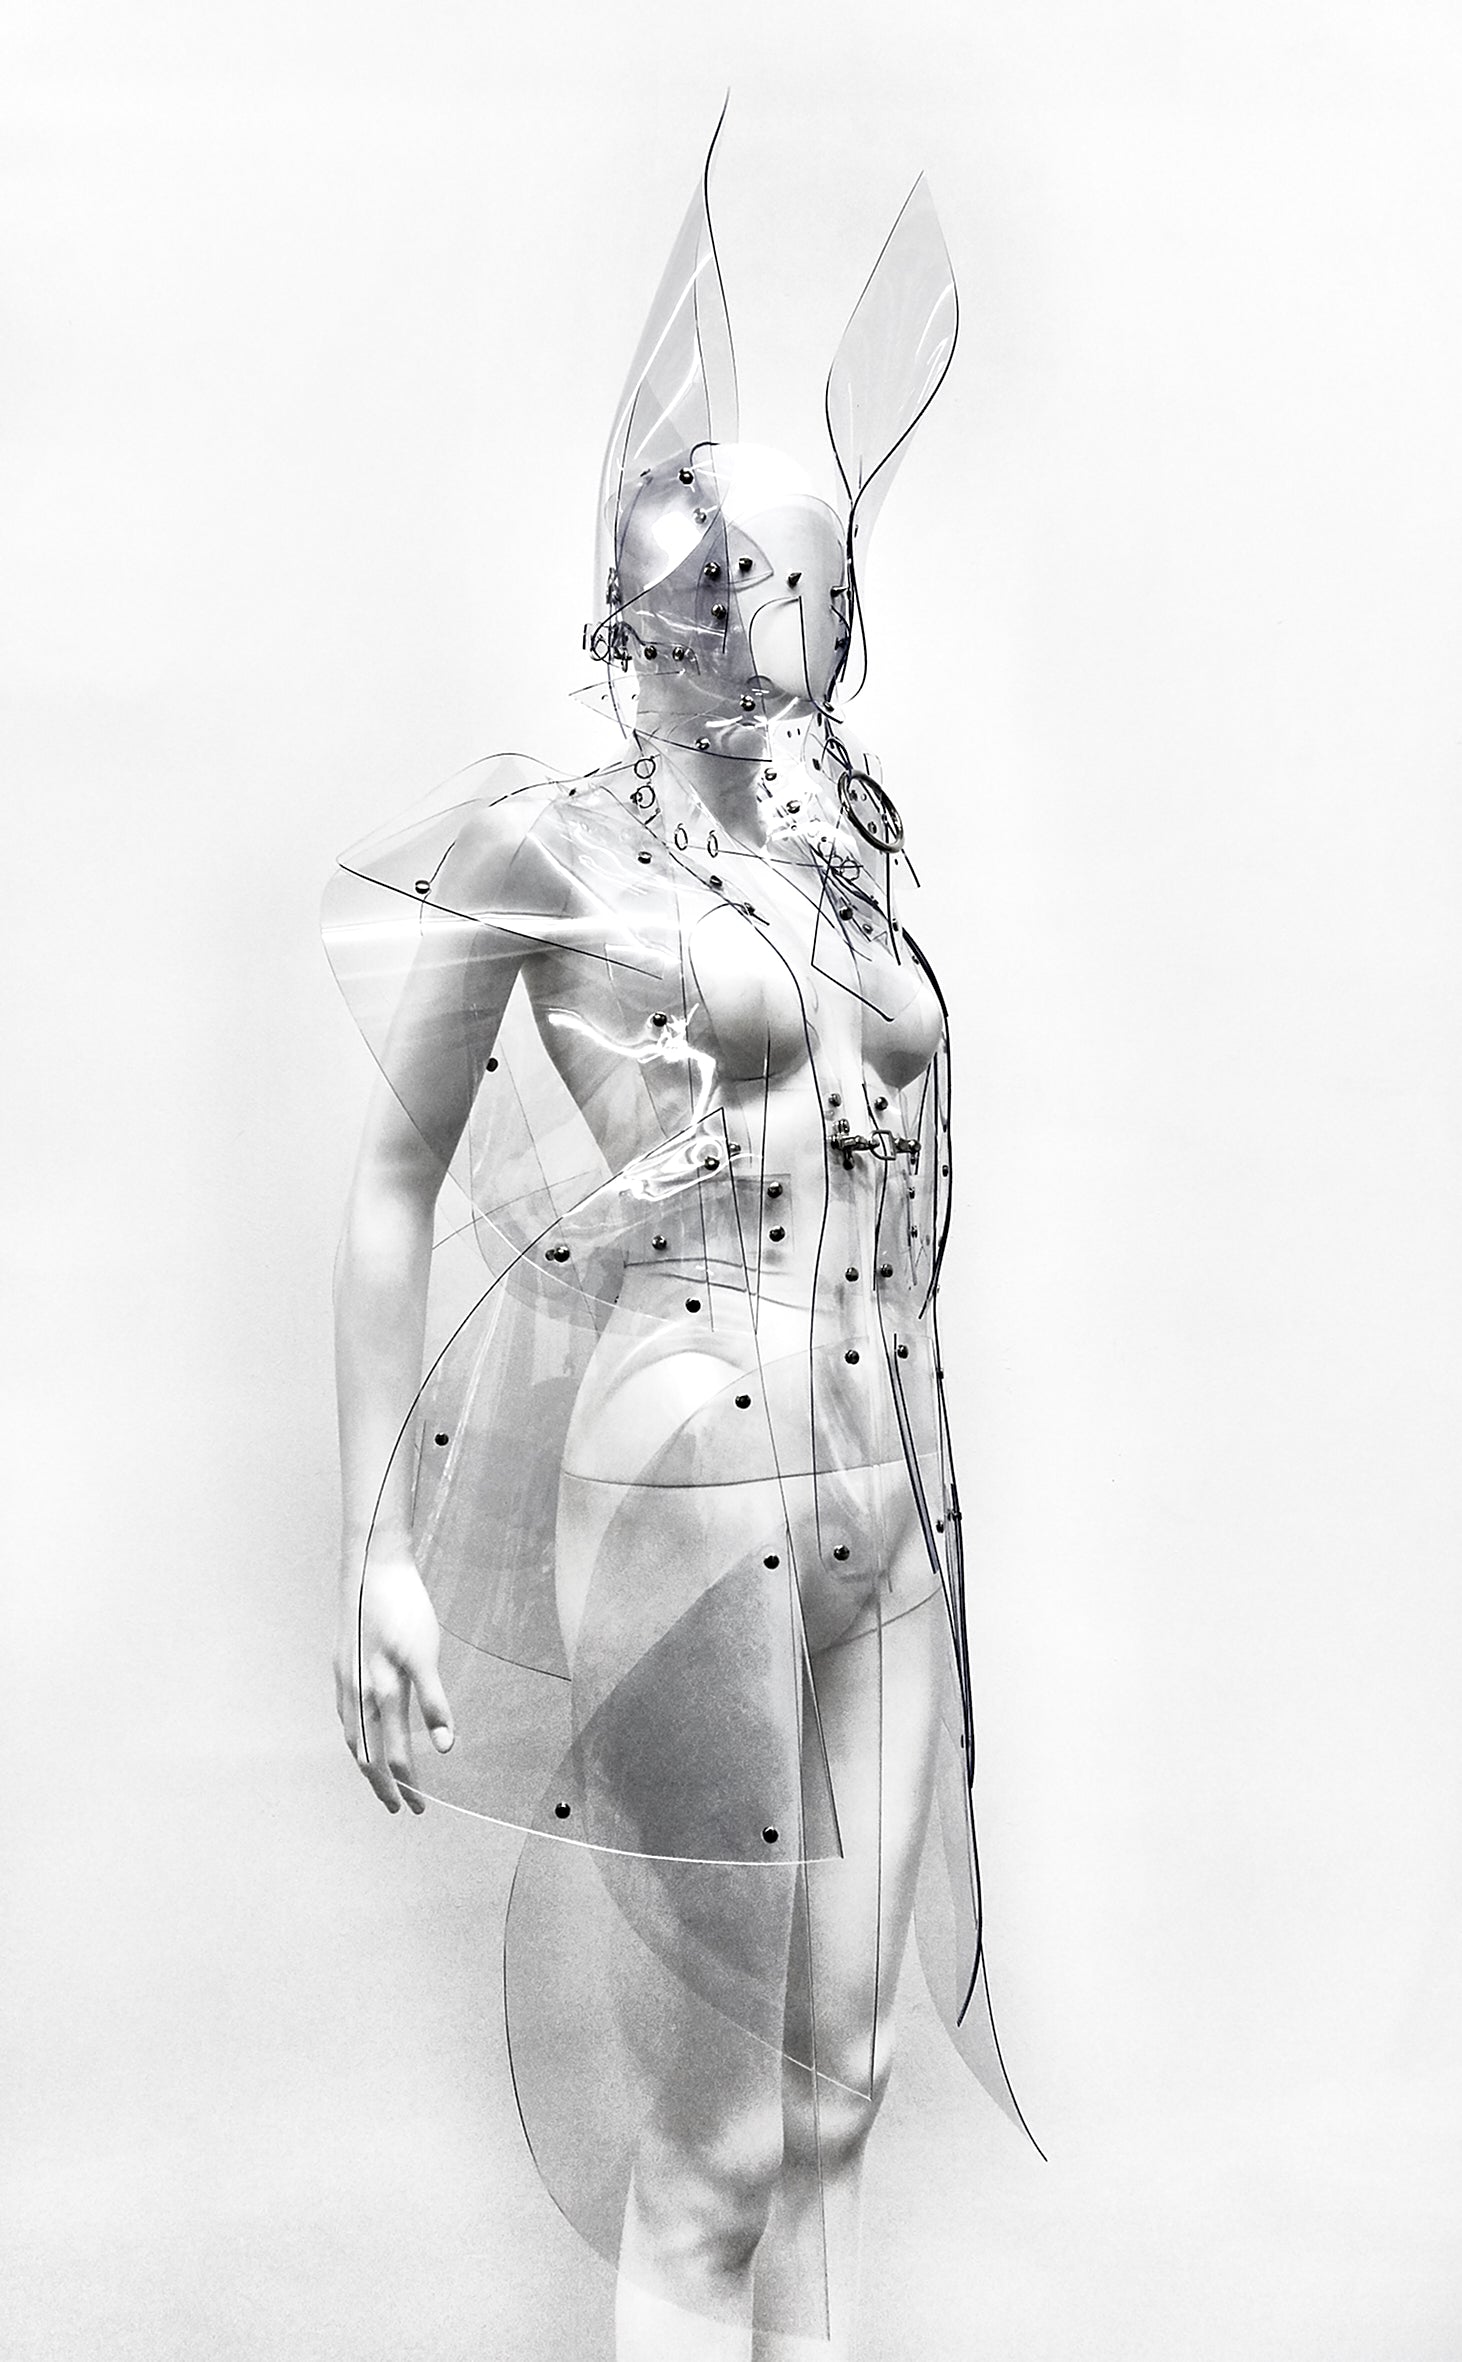 Jivomir Domoustchiev vegan vinyl pvc fashion wearable sculpture hand crafted to order only in East London Atelier independent luxury sculpture coat dress